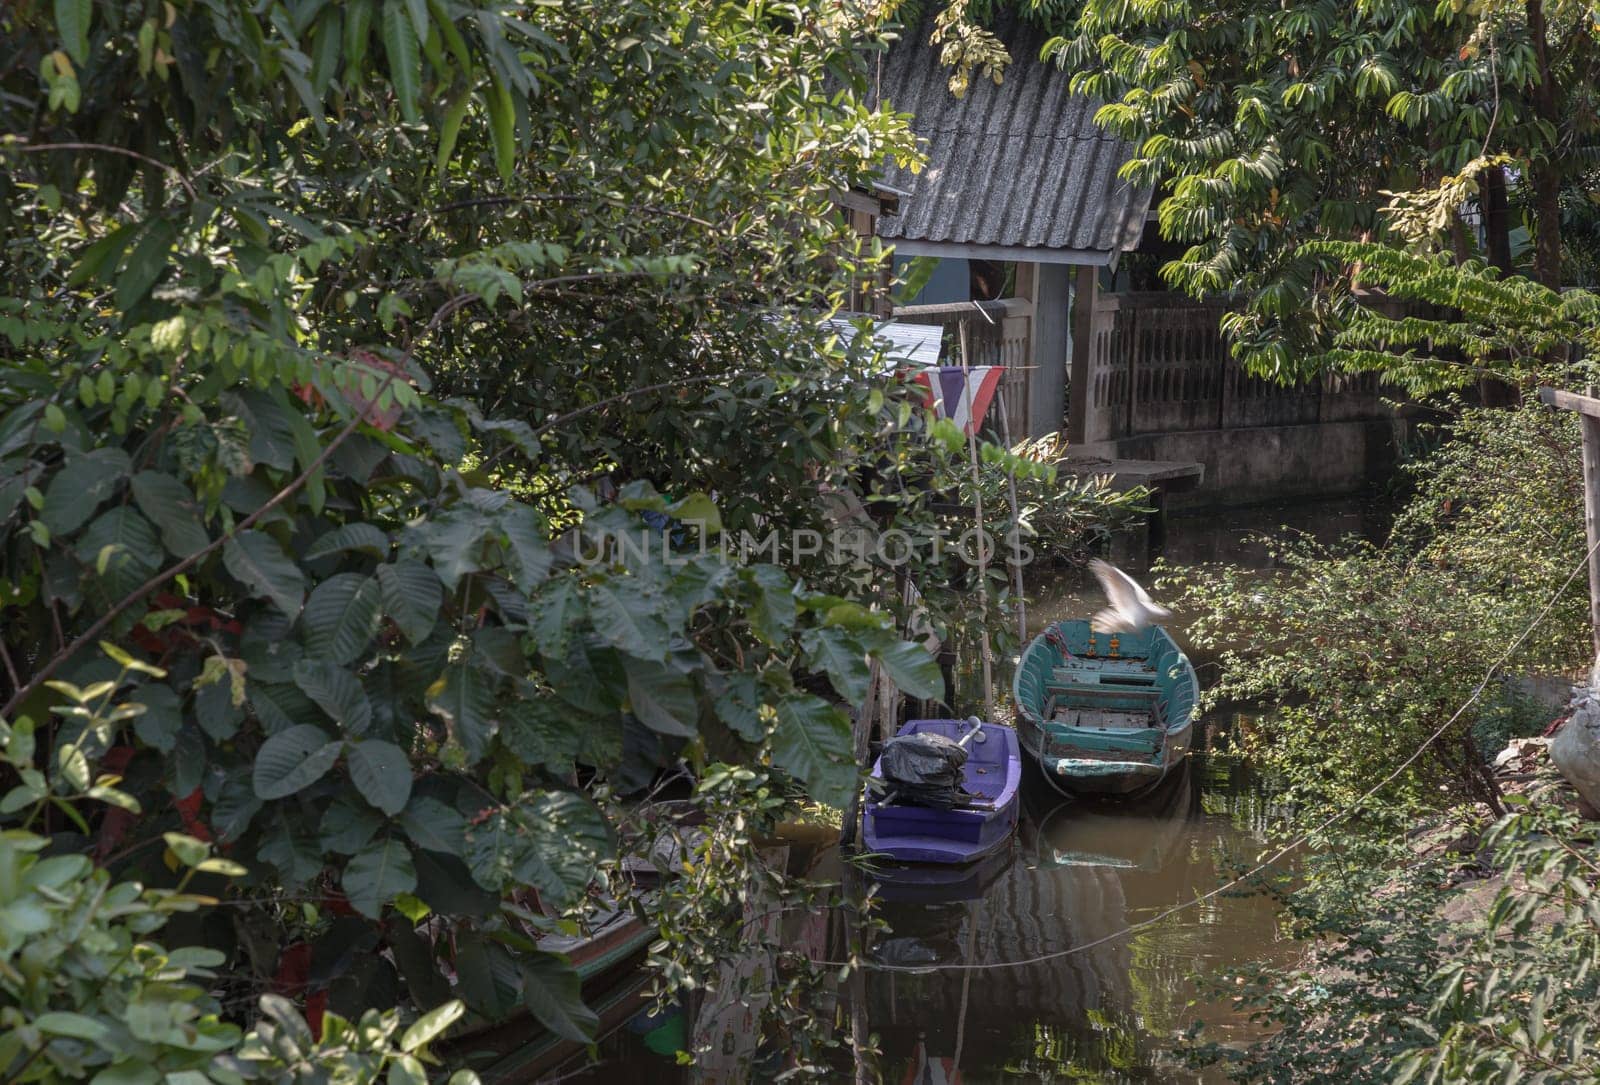 Wooden rowboat and Small motor boat moored behind house on canal amongst trees and water. Space for text, Selective focus.